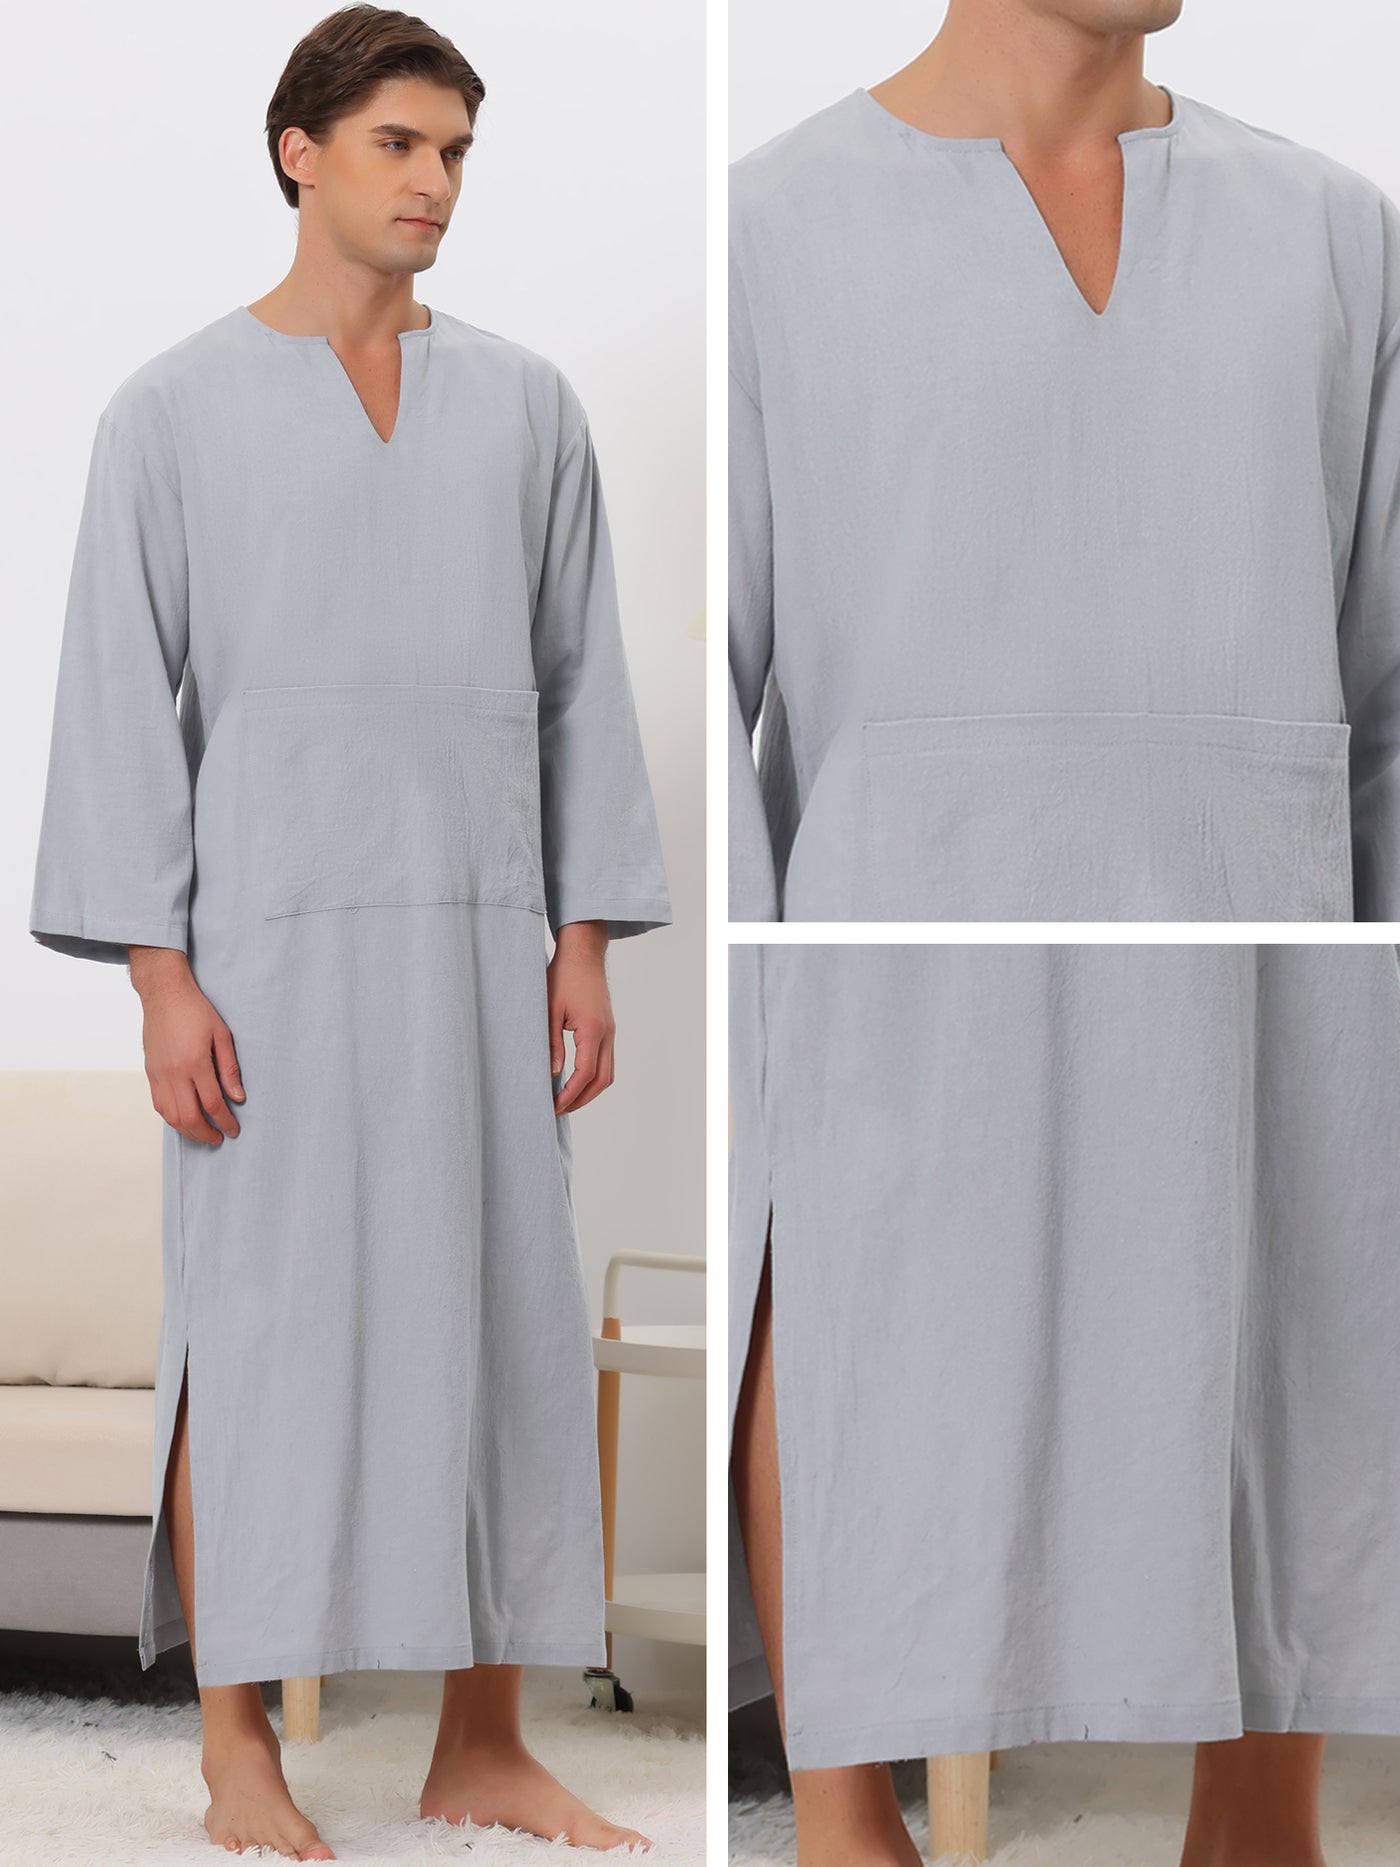 Bublédon Nightshirt for Men's V-Neck Long Sleeves Pajamas Nightgown with Pockets